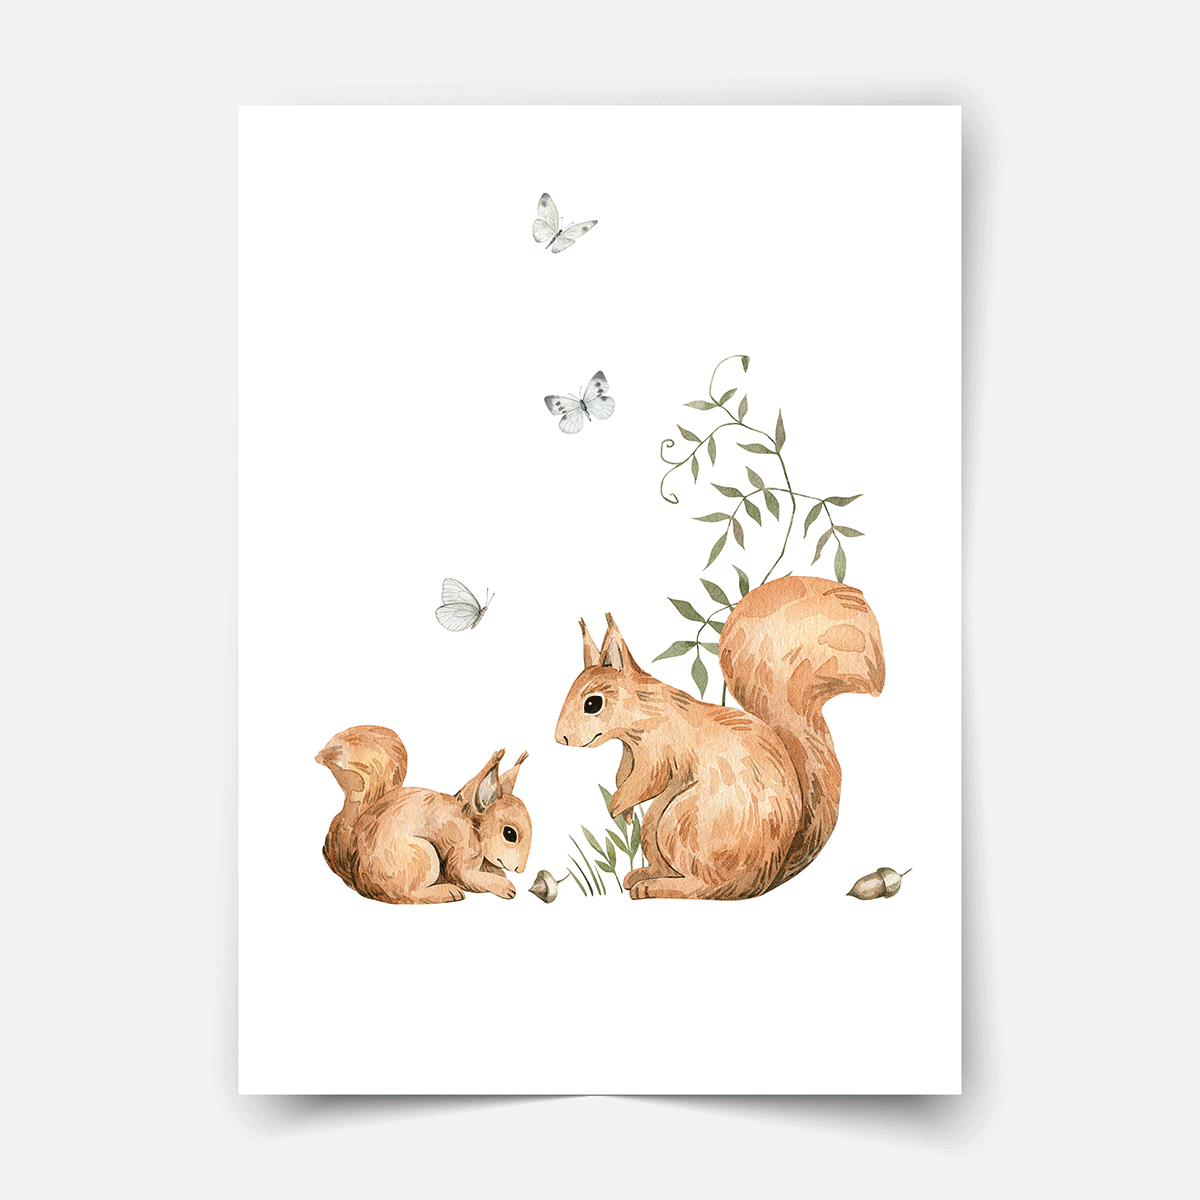 Woodland print - Magical forest - Squirrels